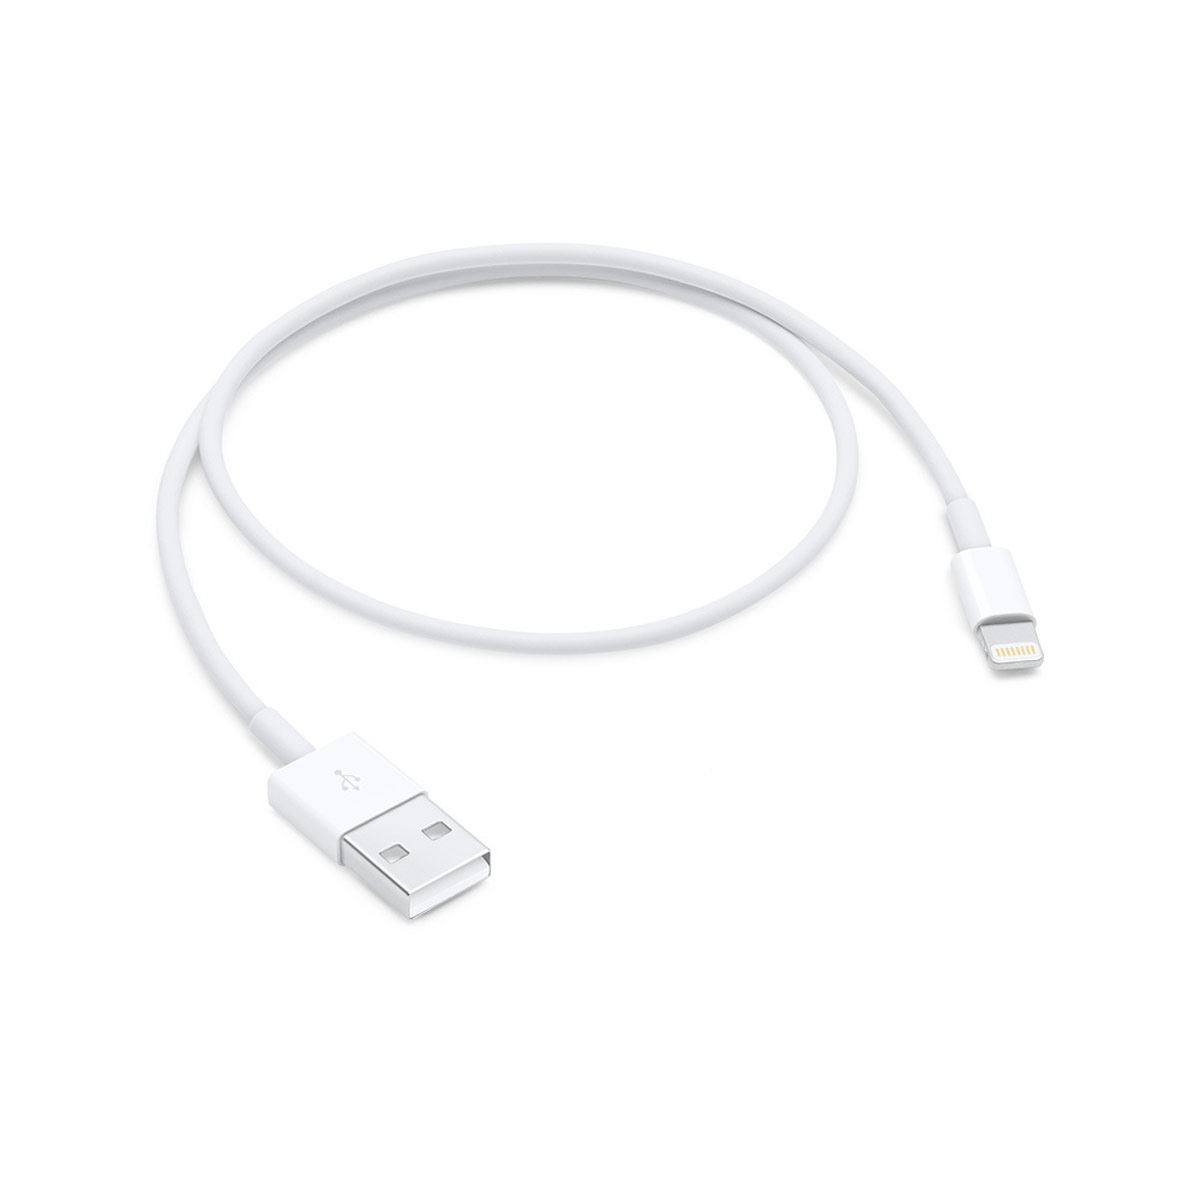 Cable iPhone Original Apple 1 Metro Tipo C A Lightning